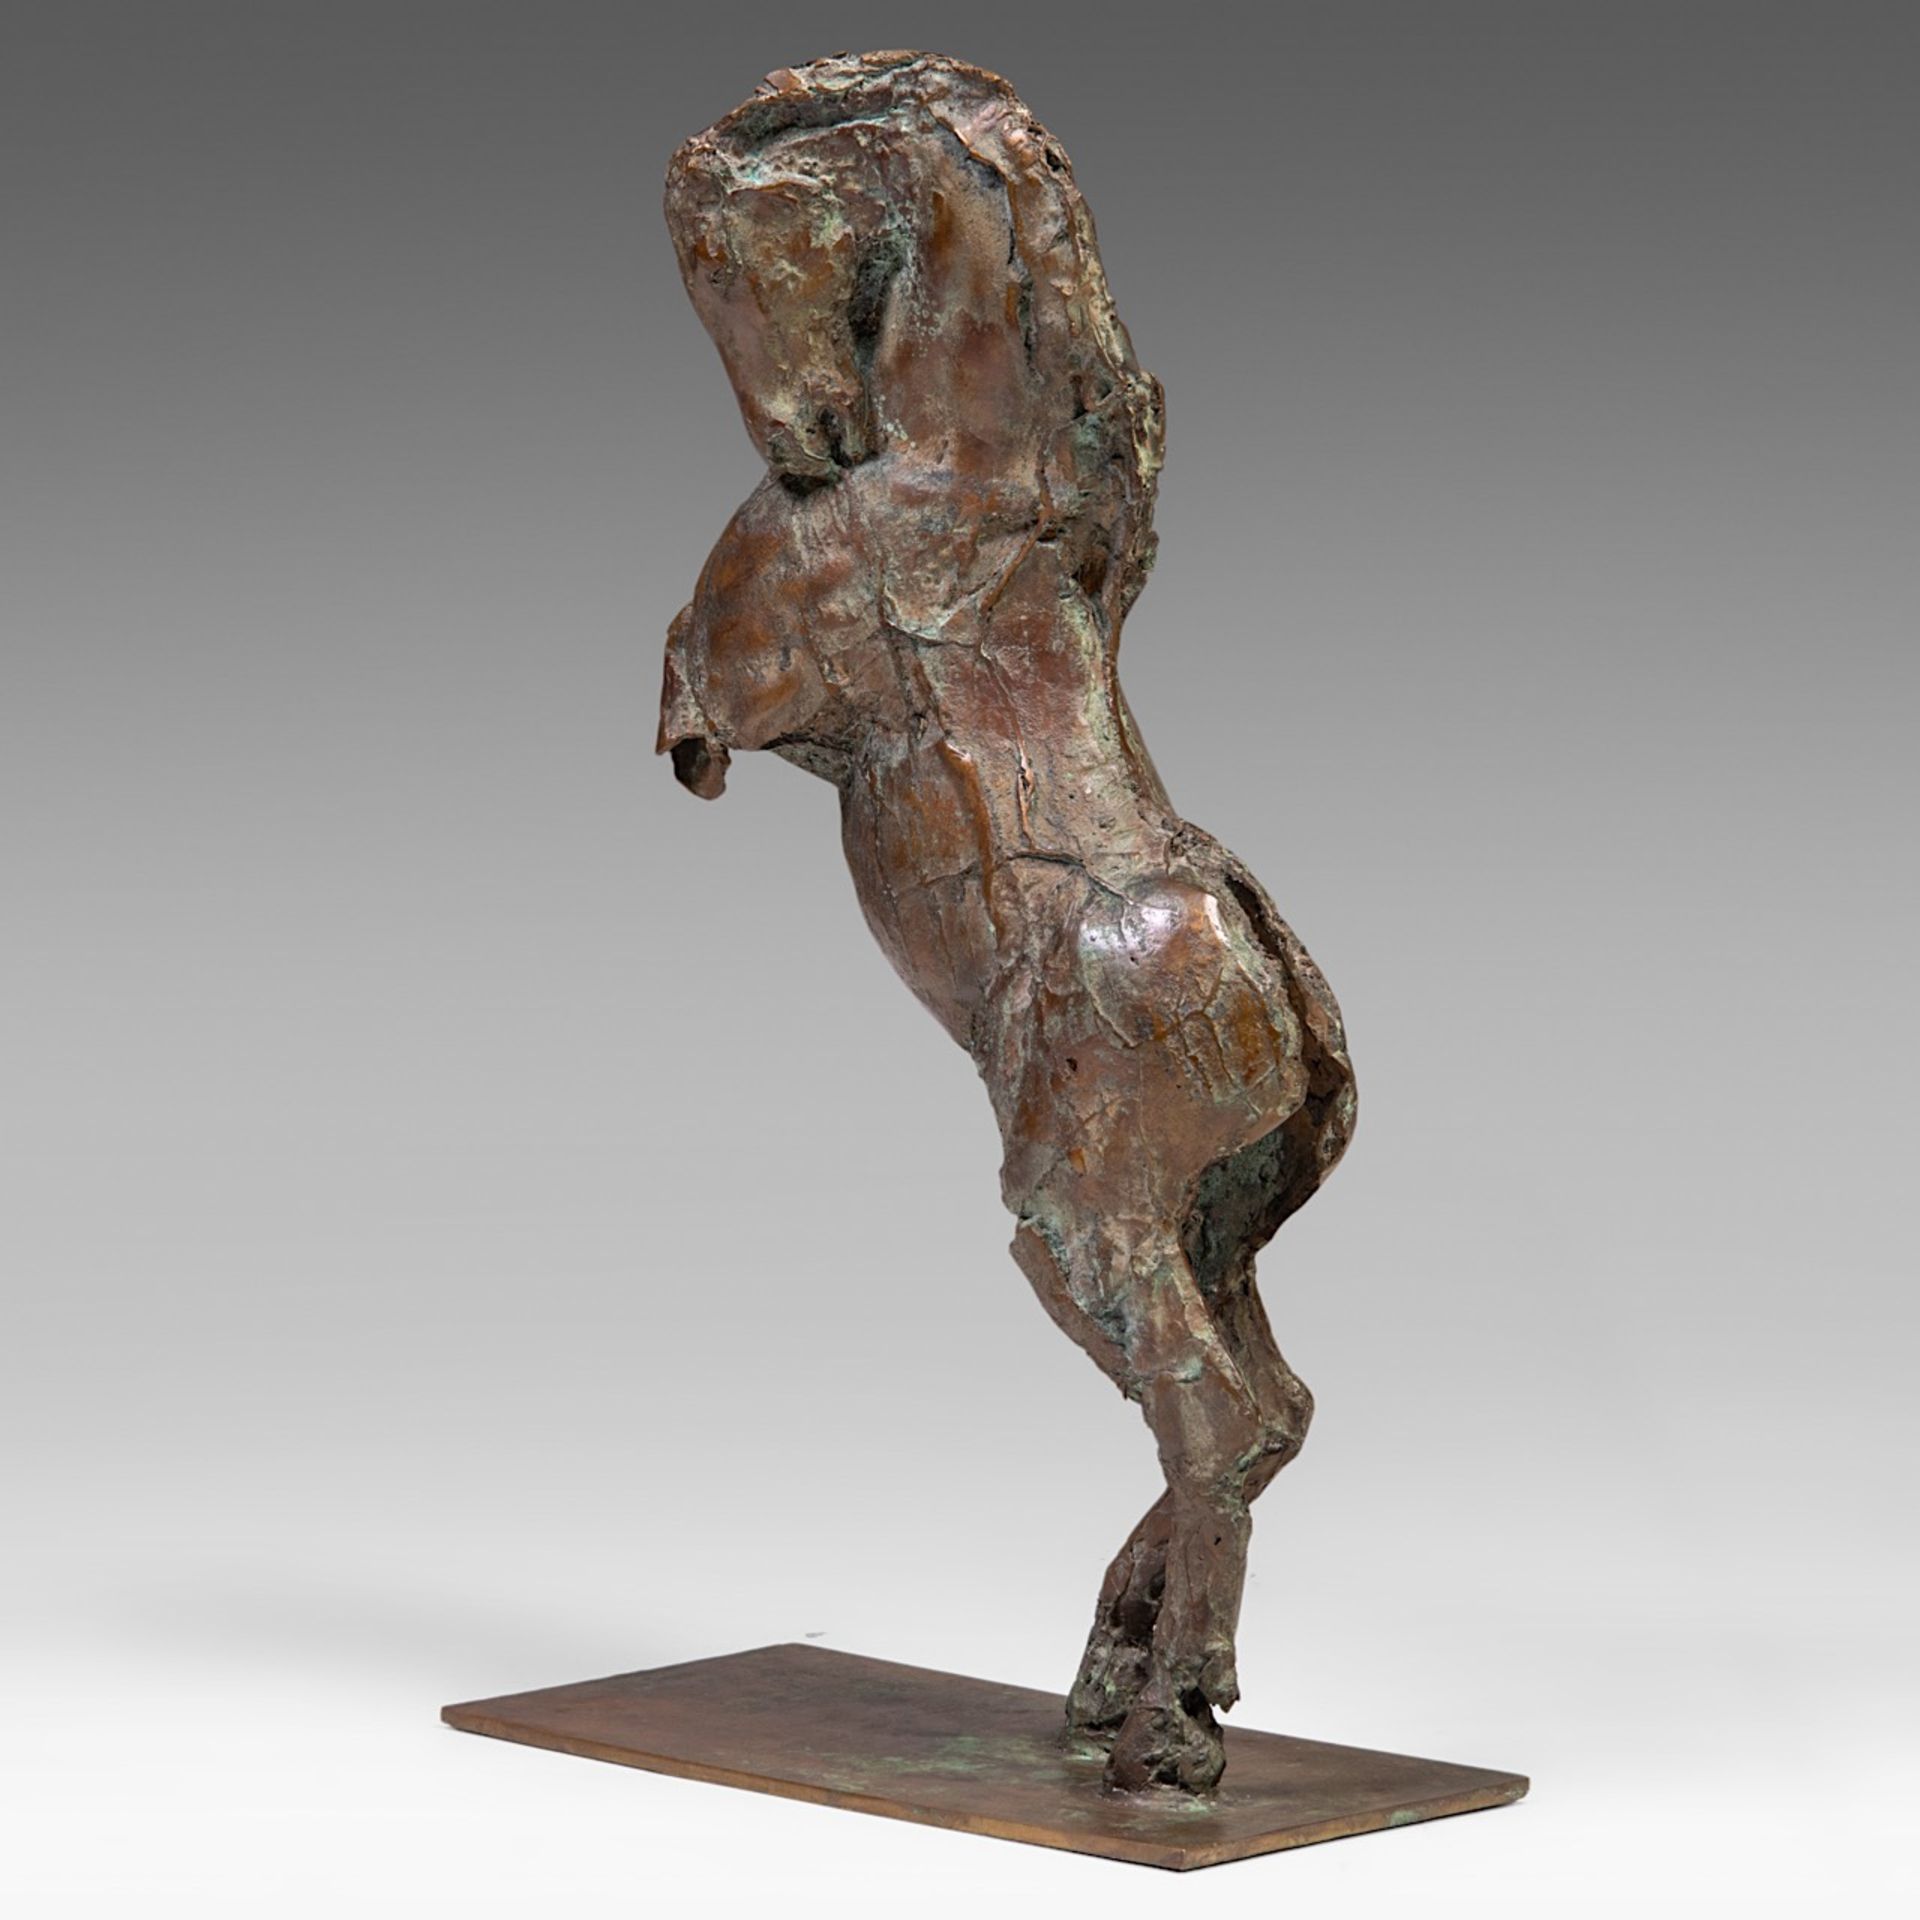 Jan Desmarets (1961), rearing horse, patinated bronze, 4/8 76 x 44.5 cm. (29.9 x 17.5 in.) - Image 2 of 7